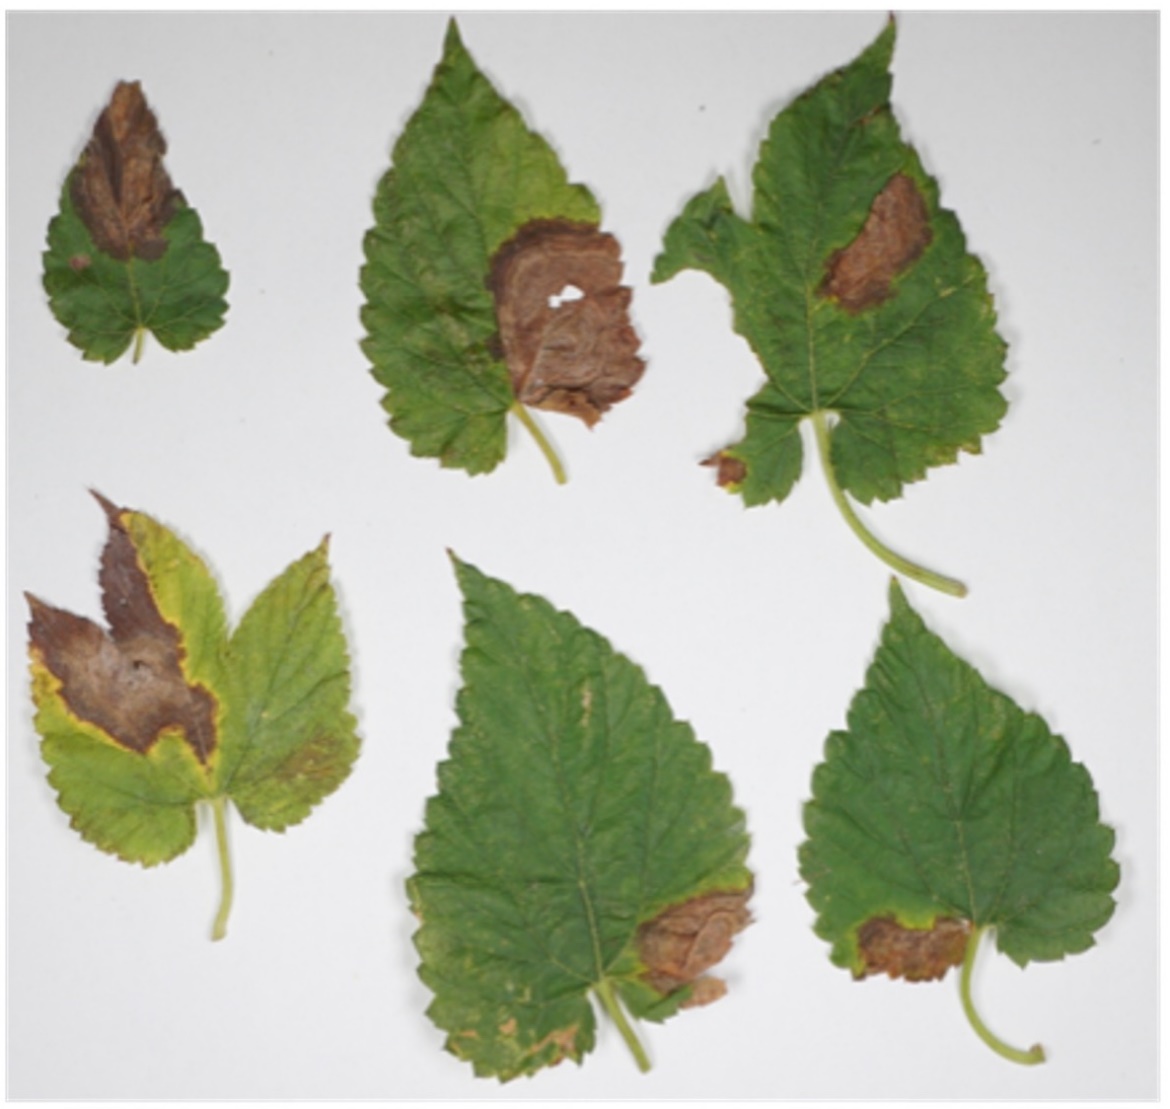 Hop leaves with brown discoloration.